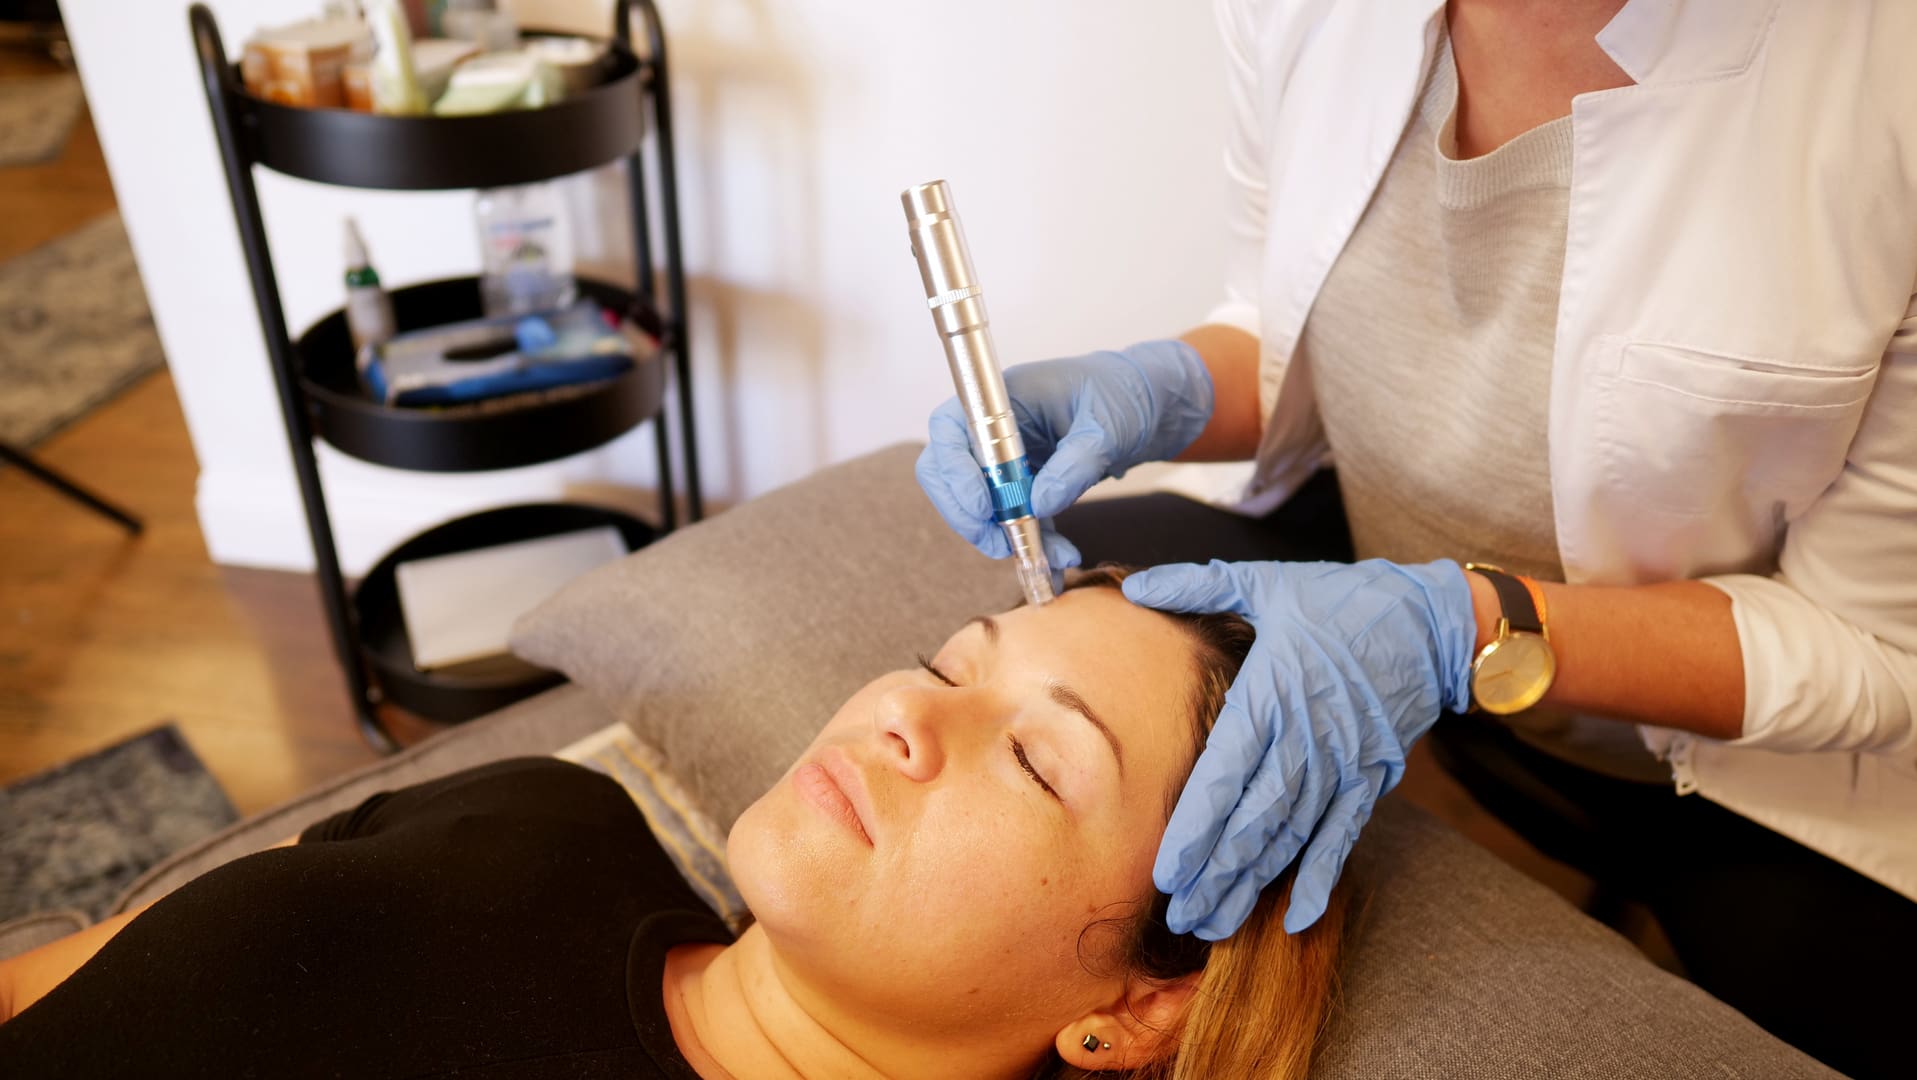 A woman getting her face microdermabrasion procedure.